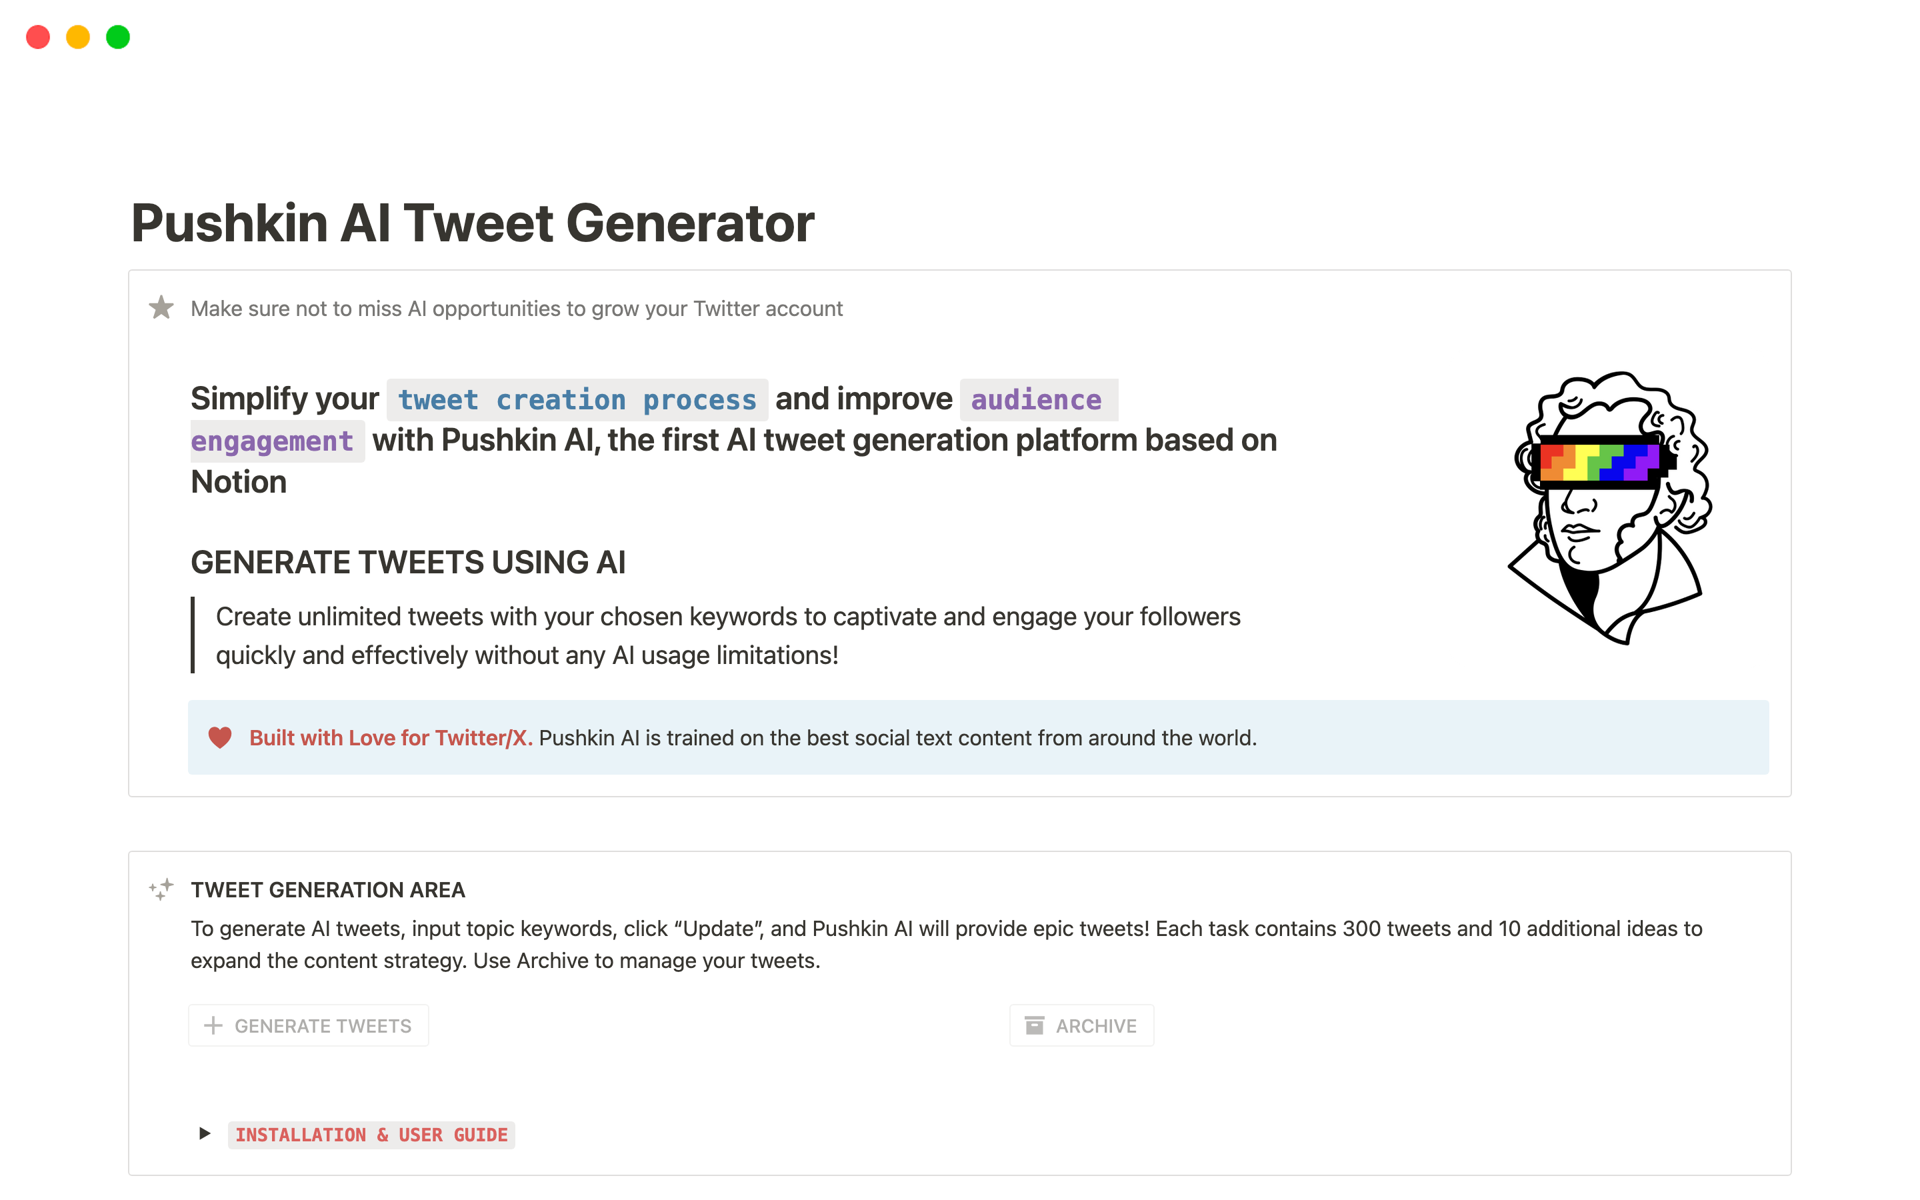 GENERATES TWEETS WITH AI